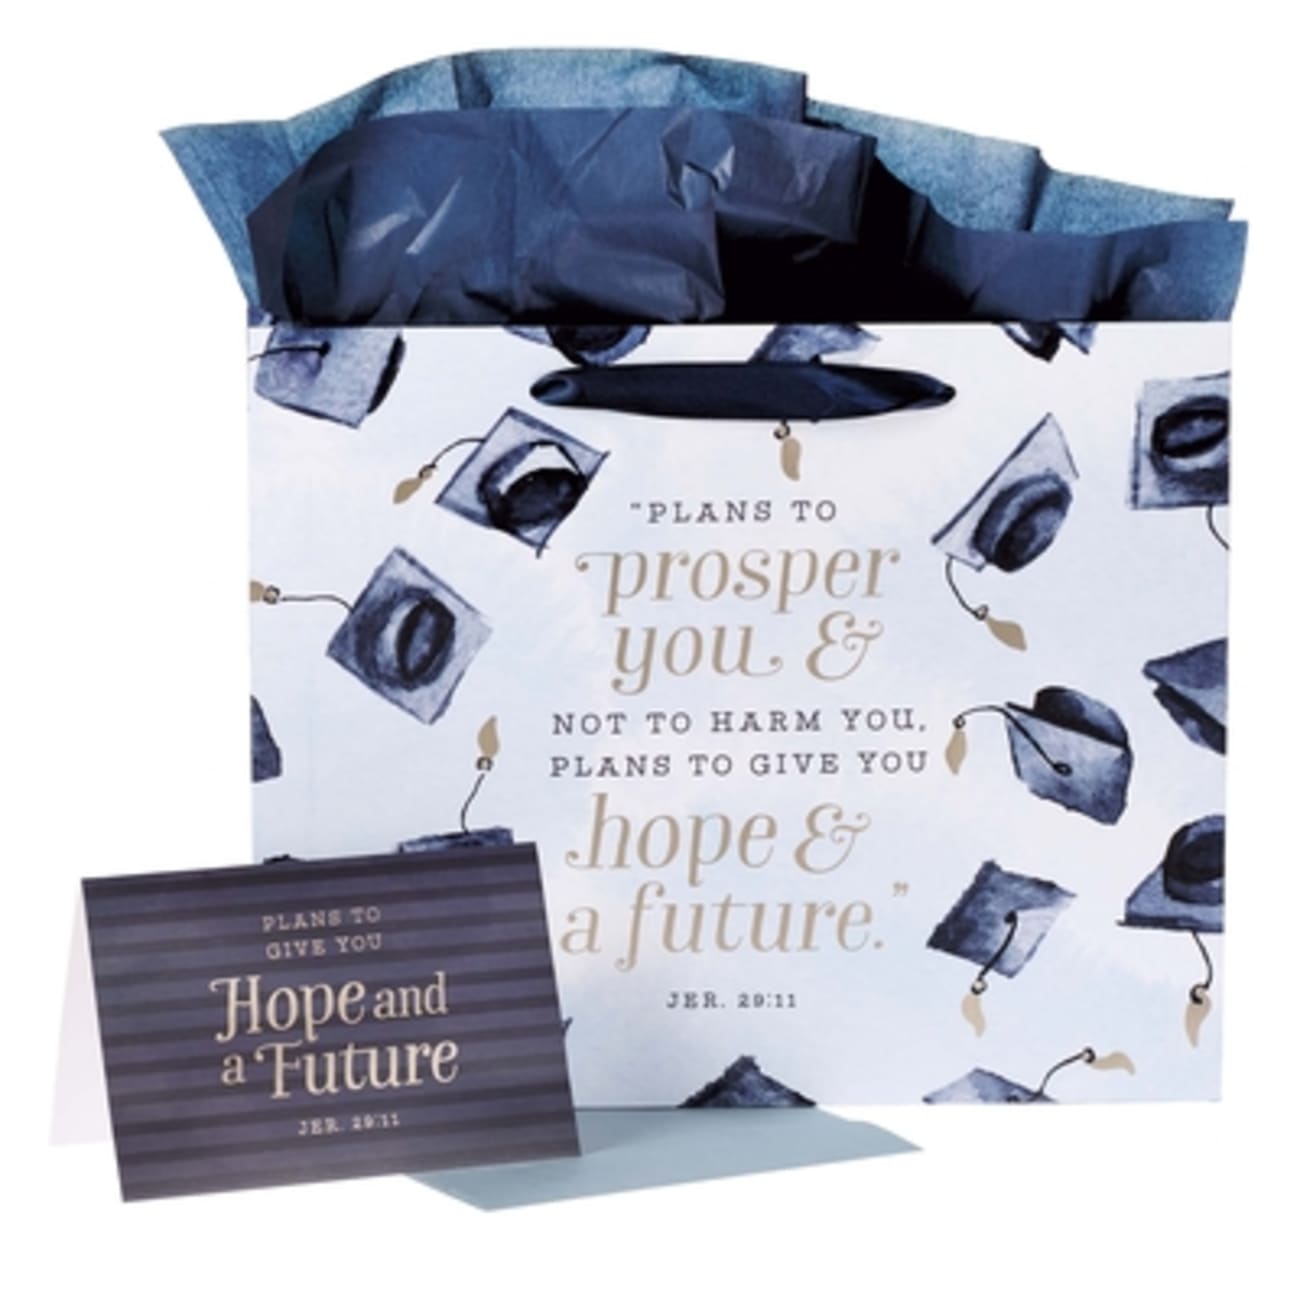 Gift Bag Inludes 1 Sheet of Tissue Paper & Gift Card, White With Navy Graduation Hats (Jer 29: 11) (Graduation Collection) Stationery